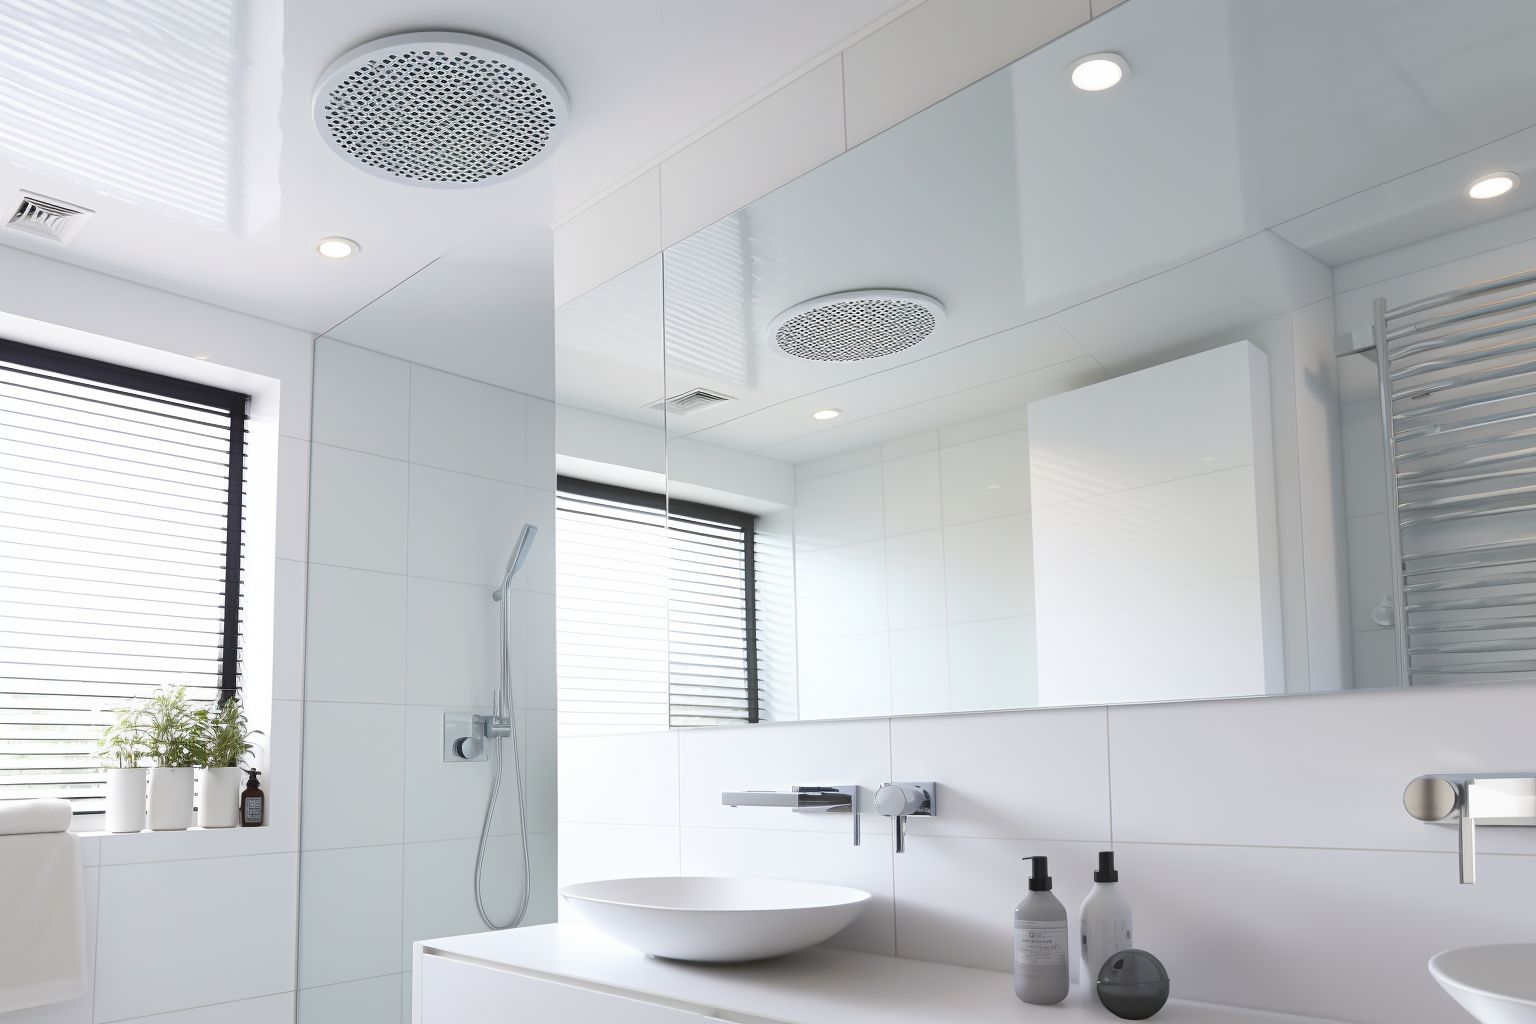 A cozy and stylish bathroom with well-integrated extractor fan, demonstrating the fan's design complementing the overall bathroom decor, with a focus on a minimalistic and modern aesthetic